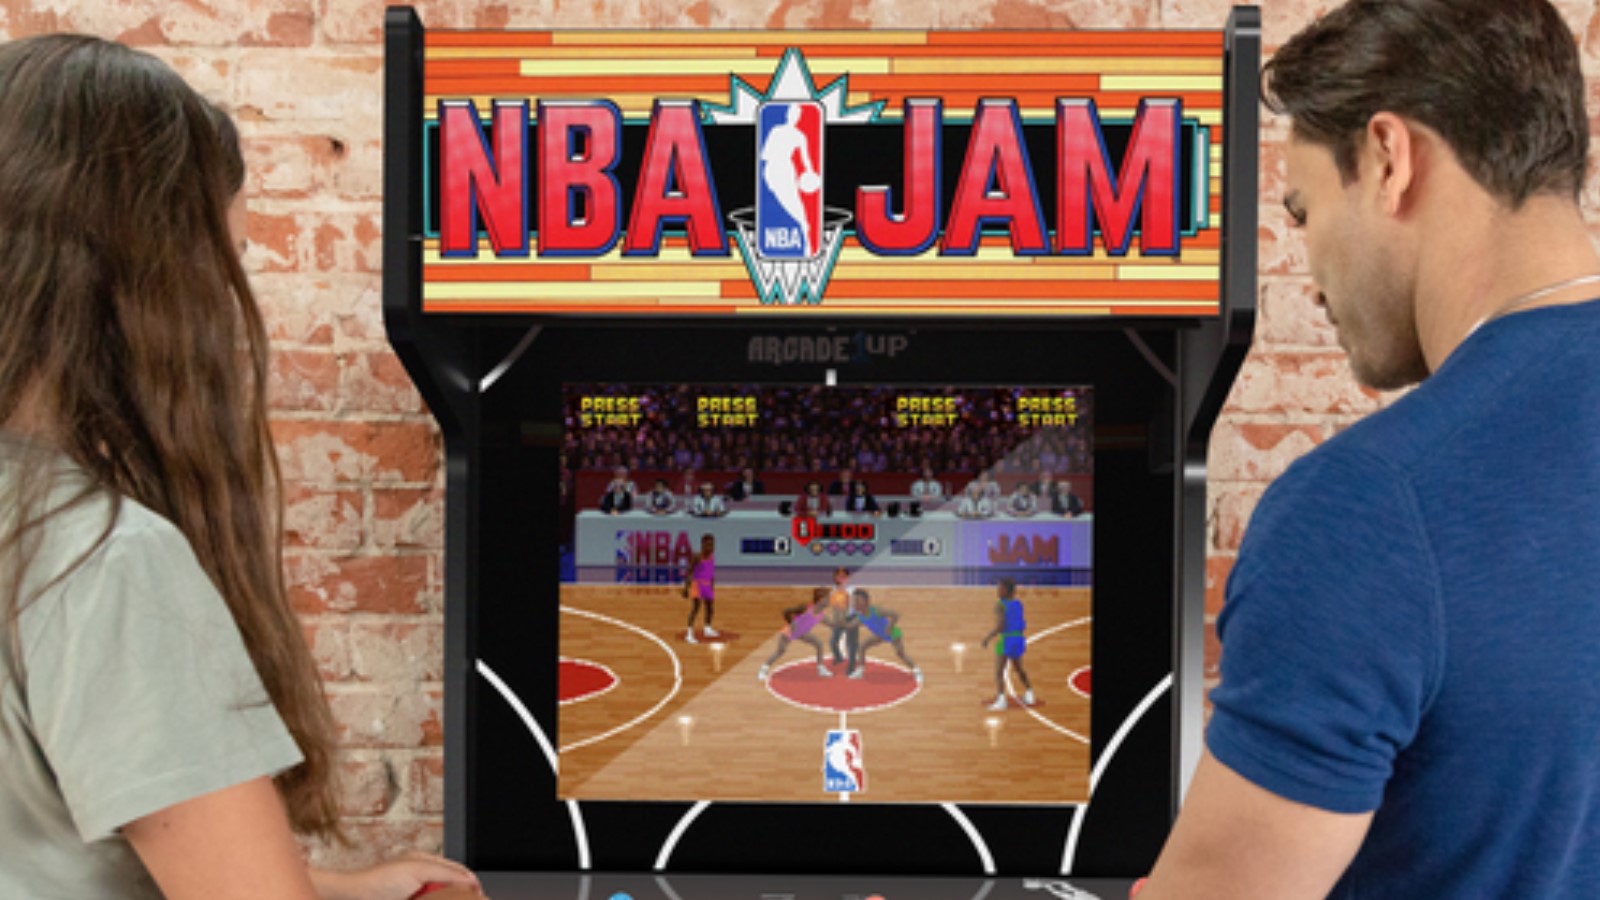 NBA JAM SHAQ EDITION, Arcade1Ups largest arcade to date, is now available — GAMINGTREND